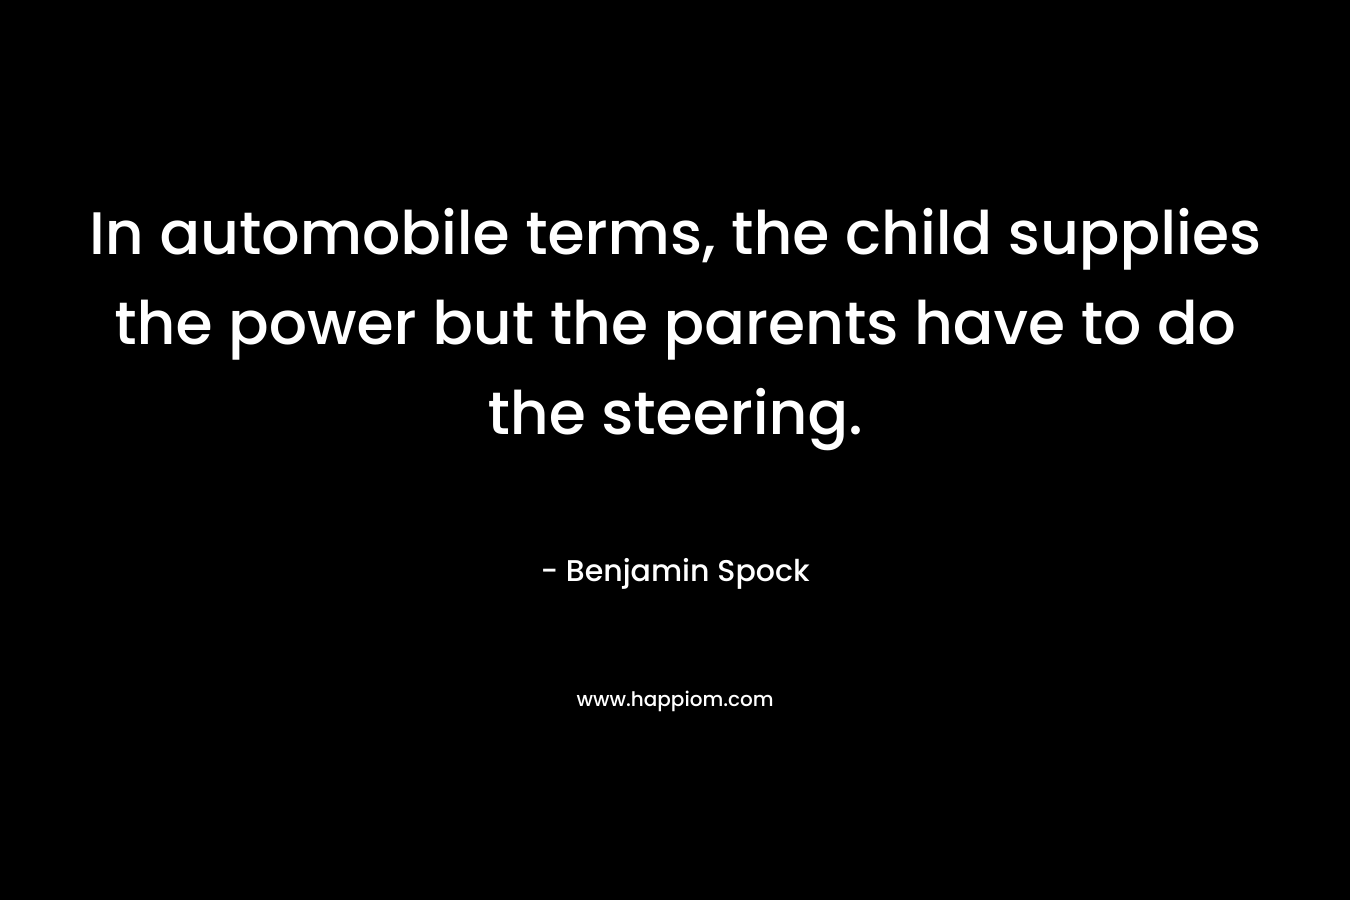 In automobile terms, the child supplies the power but the parents have to do the steering. – Benjamin Spock